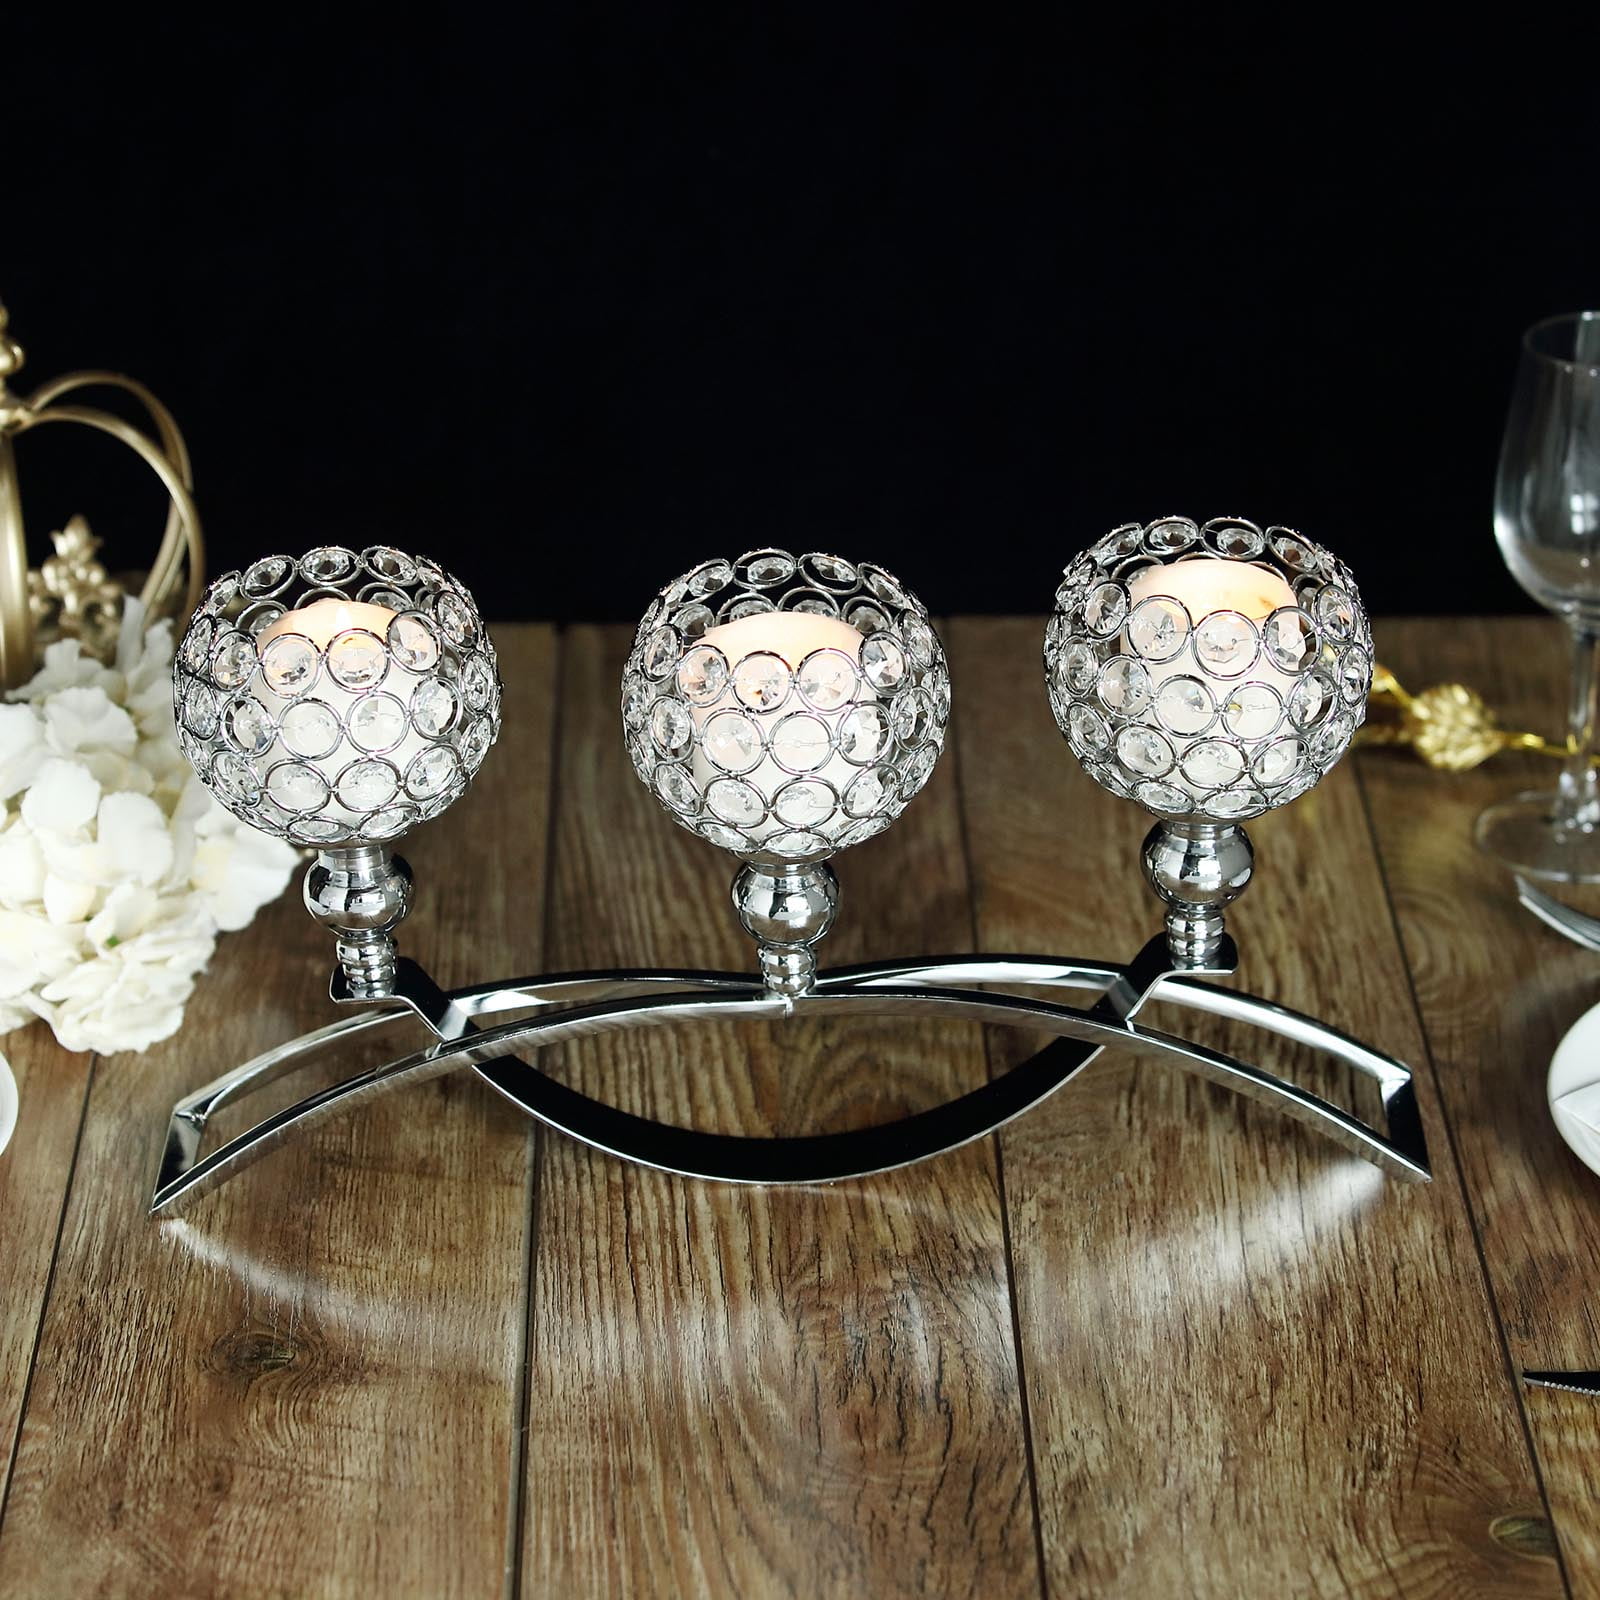 3'' Crystal Beads Candle Holder Banquet Candlestick Table Centerpiece-Silver 